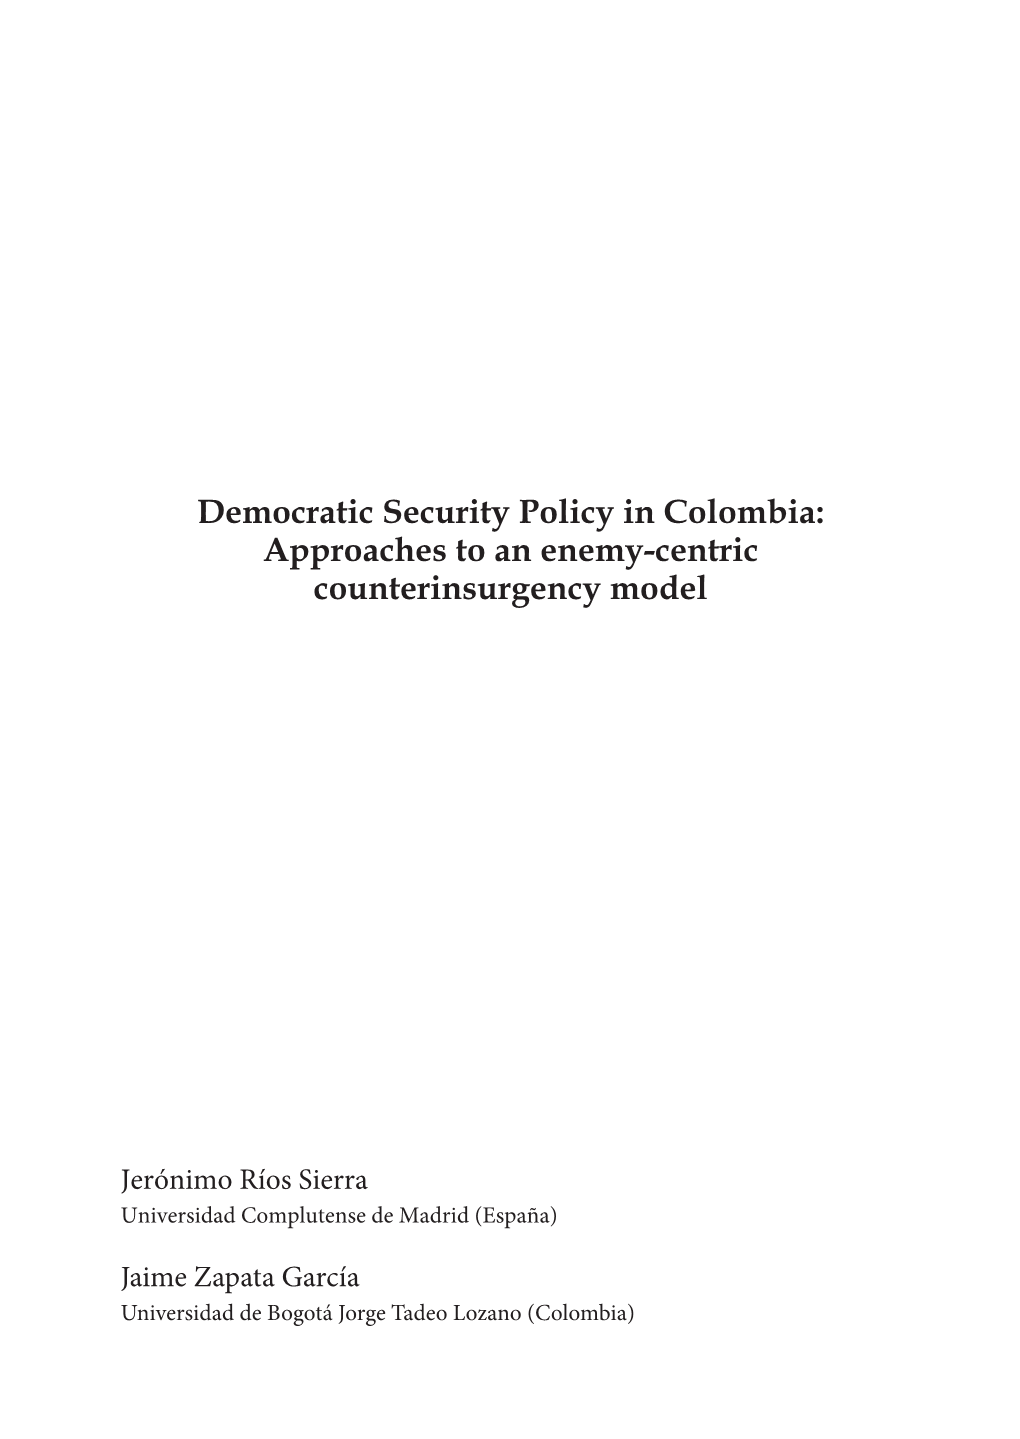 Democratic Security Policy in Colombia: Approaches to an Enemy-Centric Counterinsurgency Model